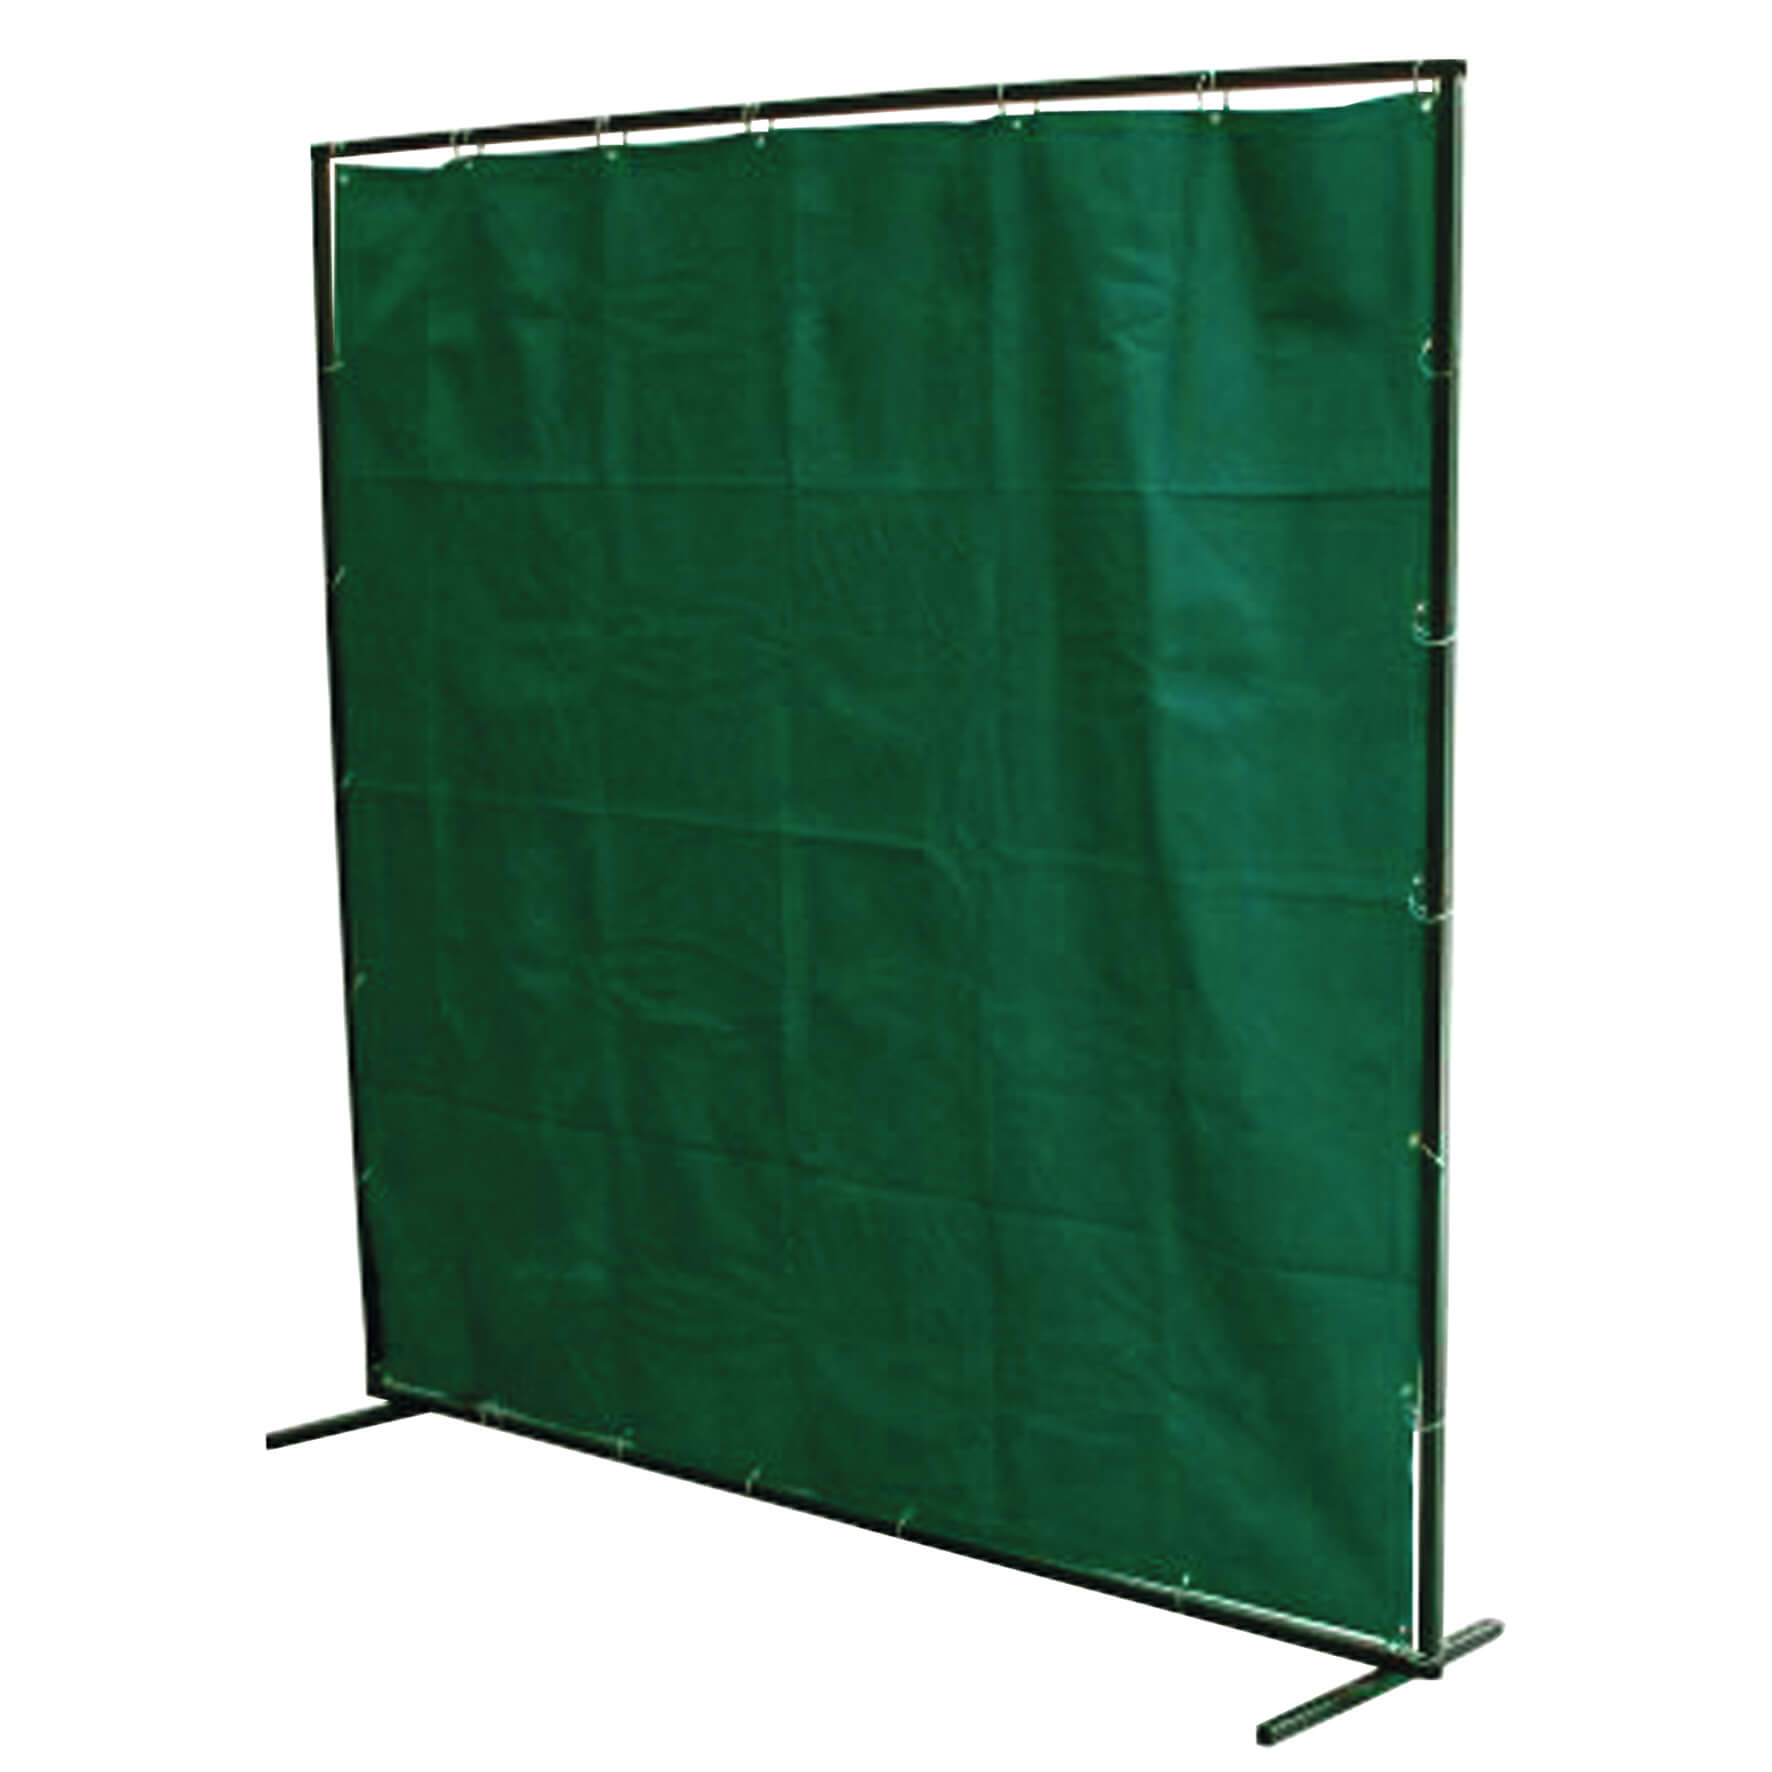 Welding Curtain and Frame